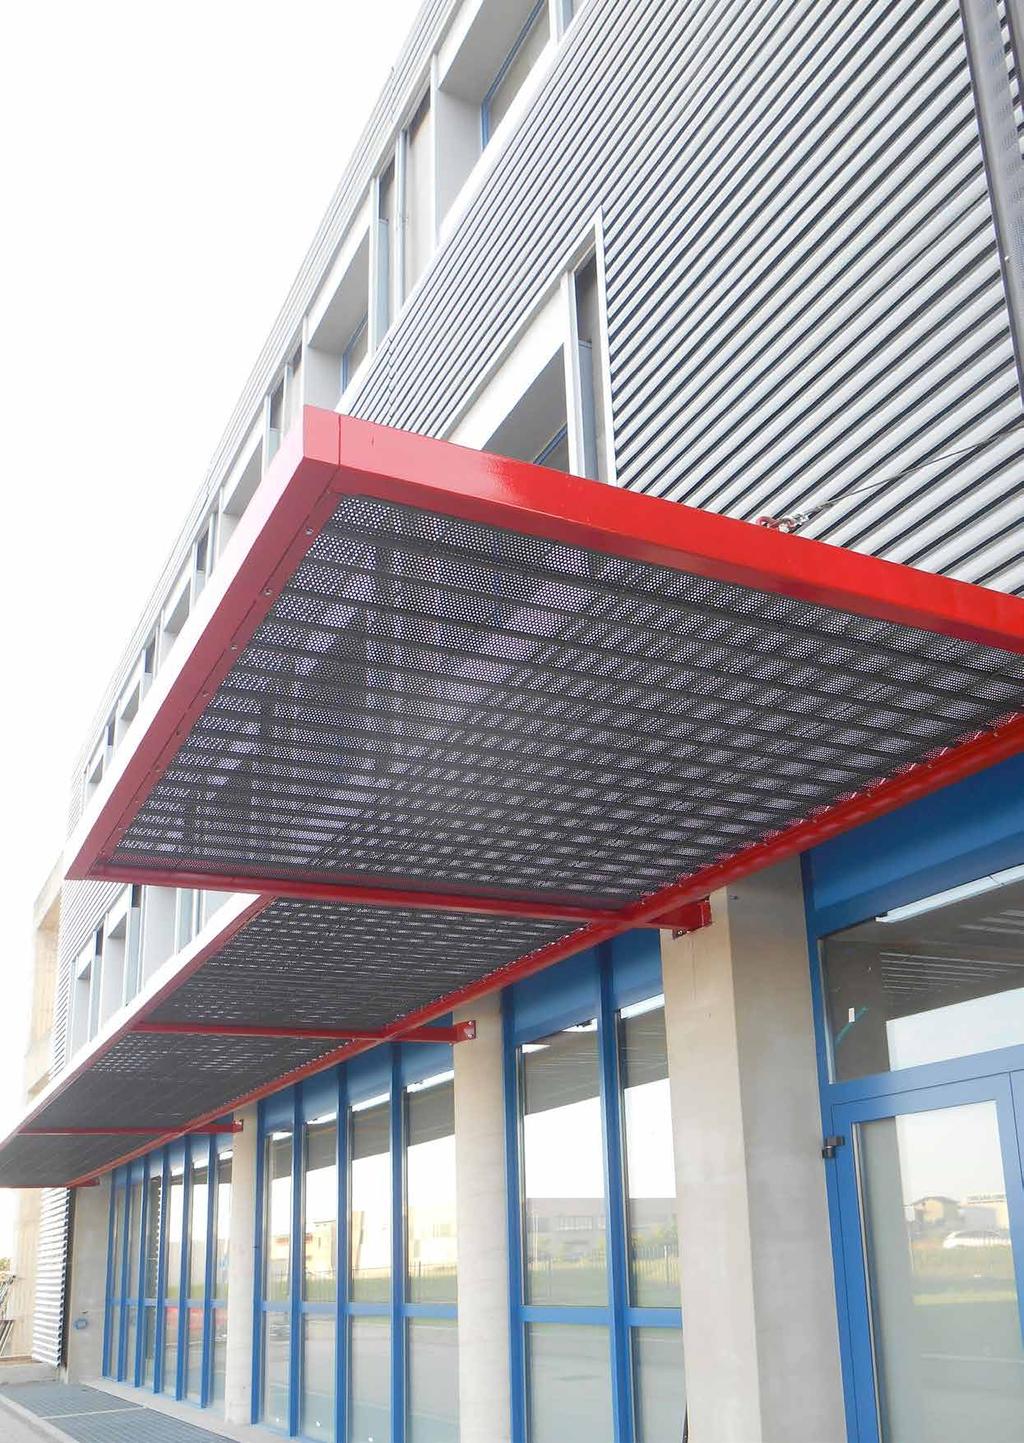 Advantages of Mild Steel (S235JR) Price - mild steel louvres are less expensive than aluminium.